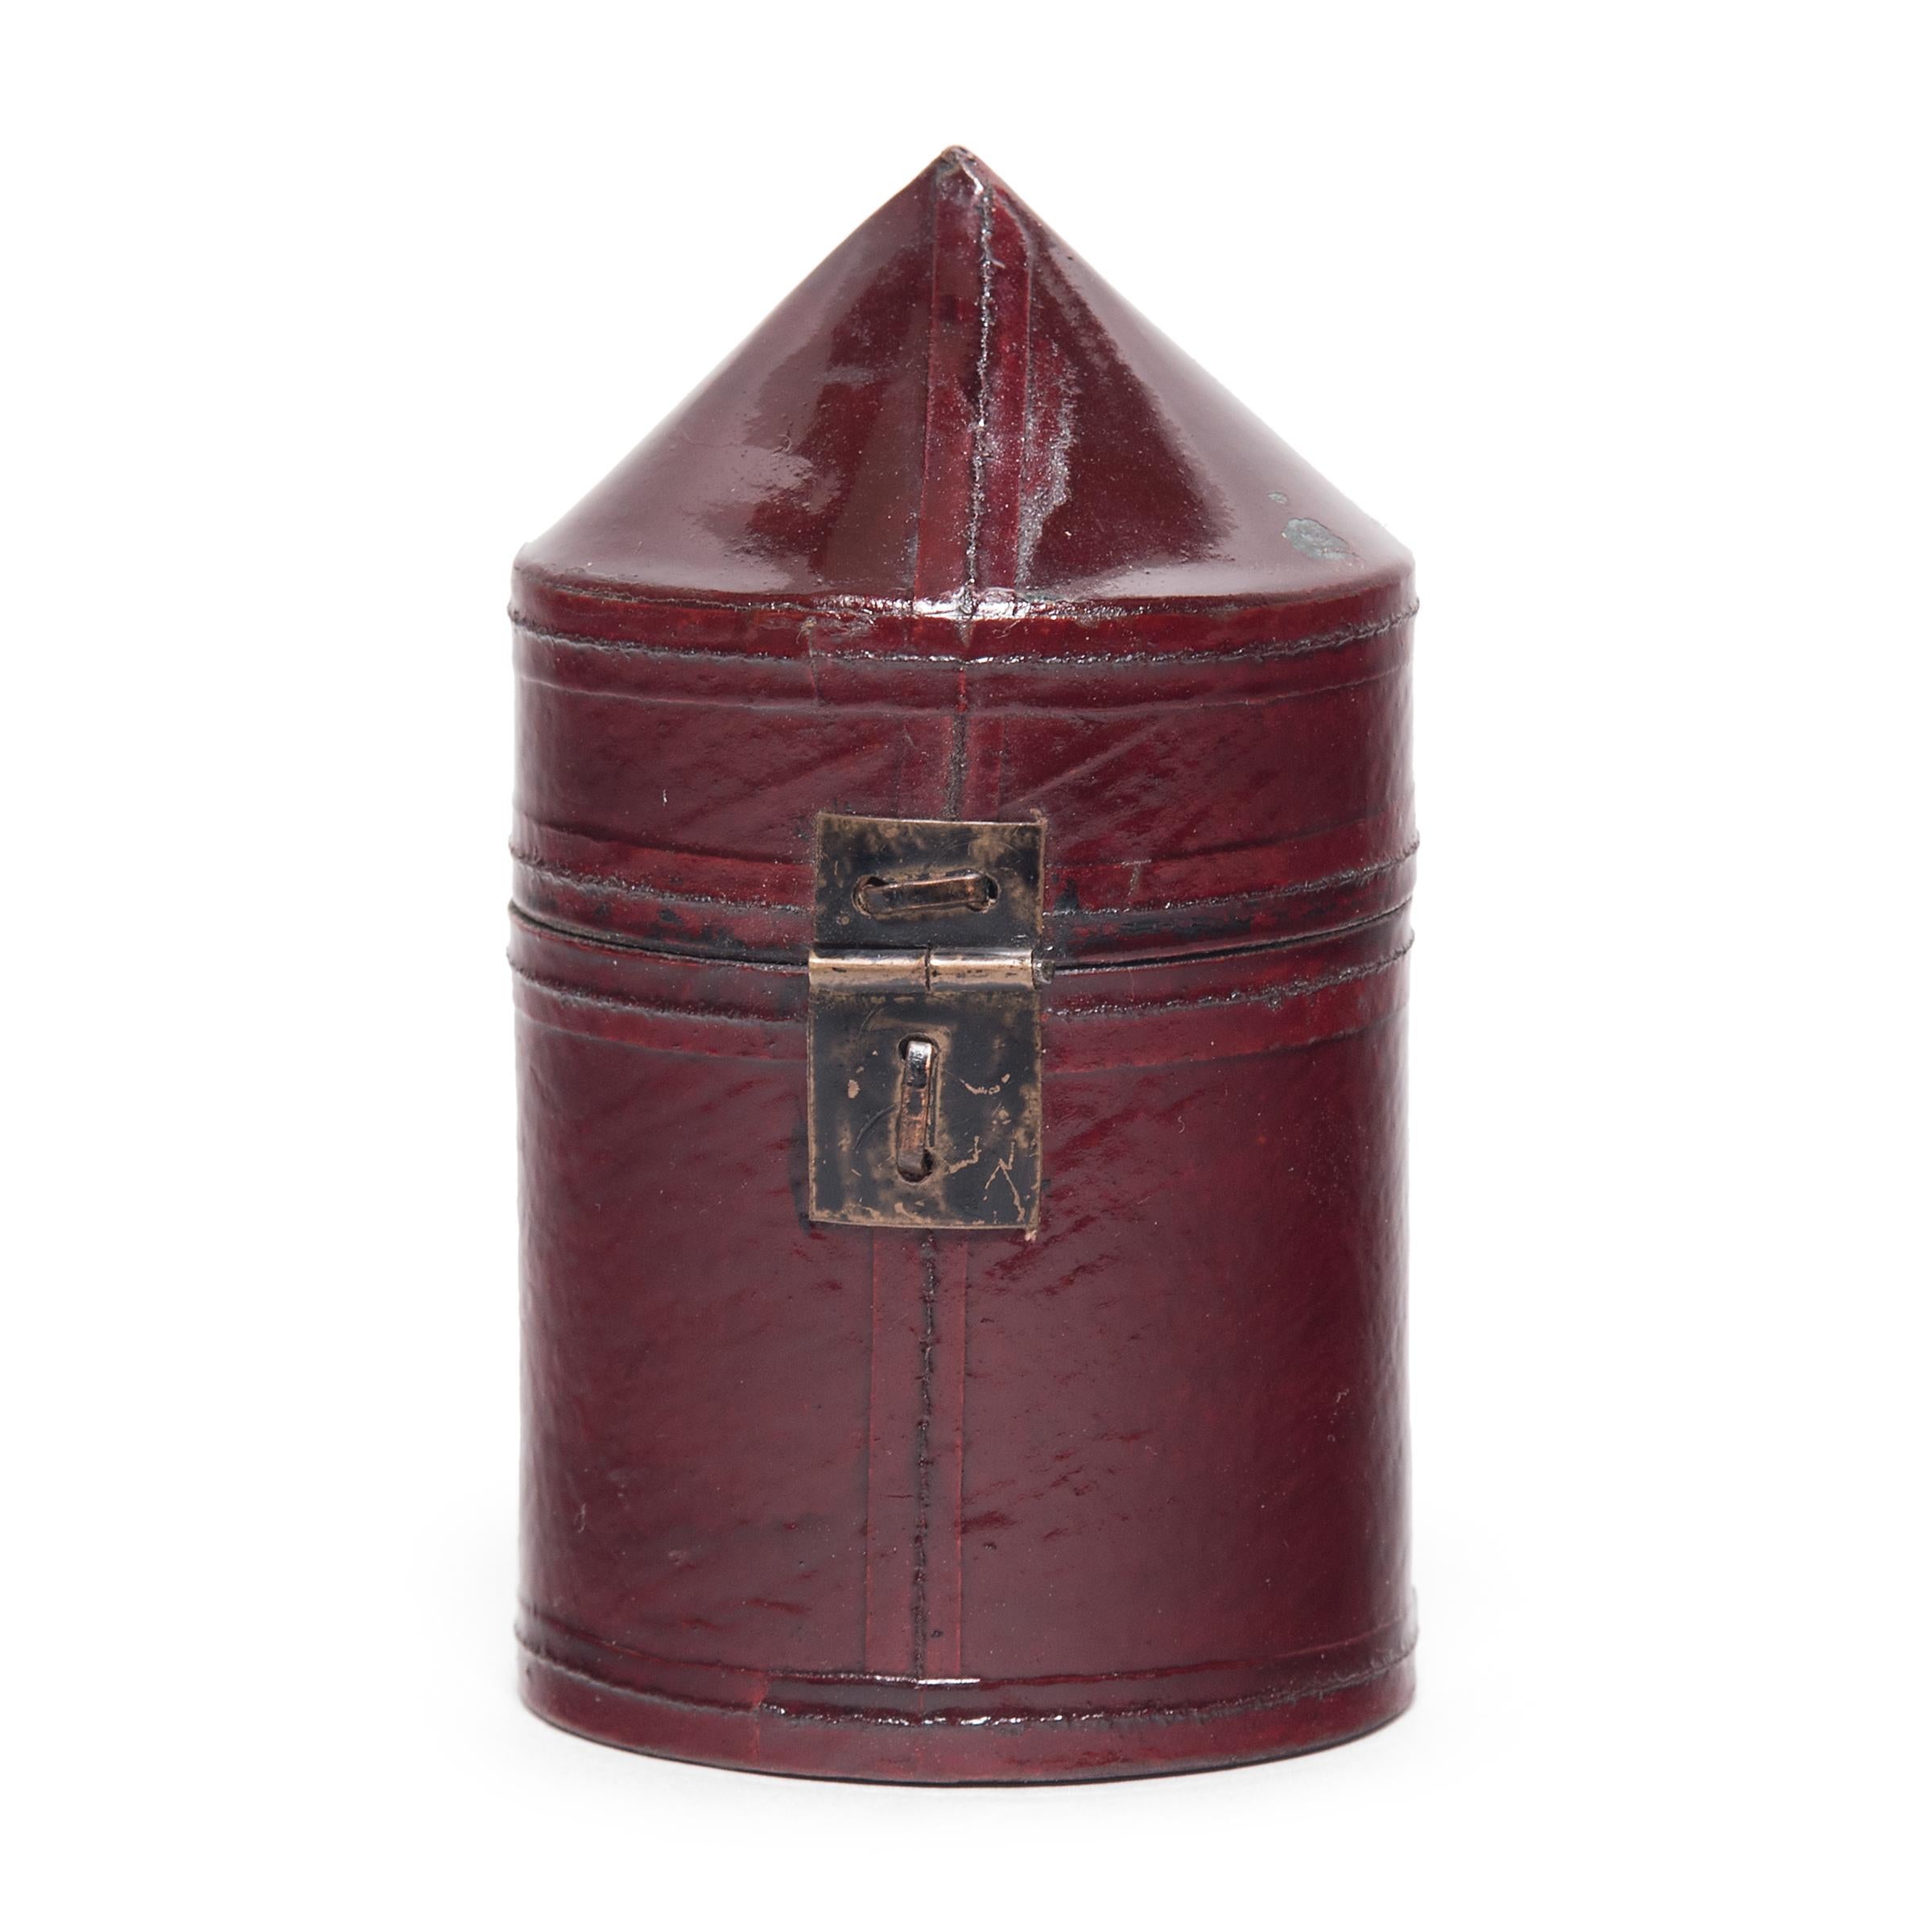 Qing Miniature Chinese Red Lacquer Hat Box, circa 1850